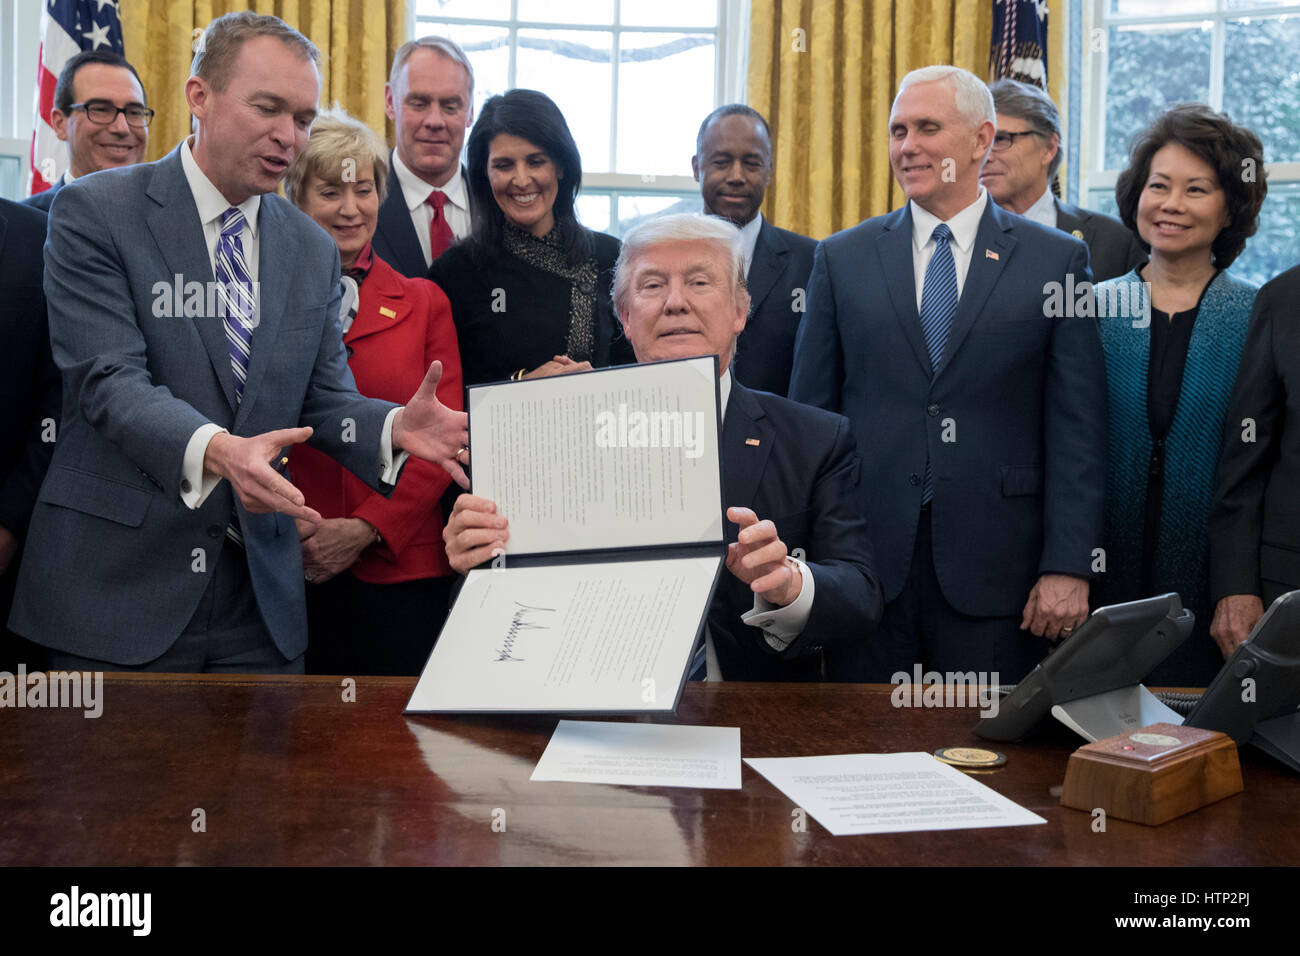 Washington DC, USA 13th March, 2017 US President Donald J Trump (C) shows an executive order entitled, 'Comprehensive Plan for Reorganizing the Executive Branch', after signing it beside members of his Cabinet in the Oval Office of the White House in Wash Stock Photo